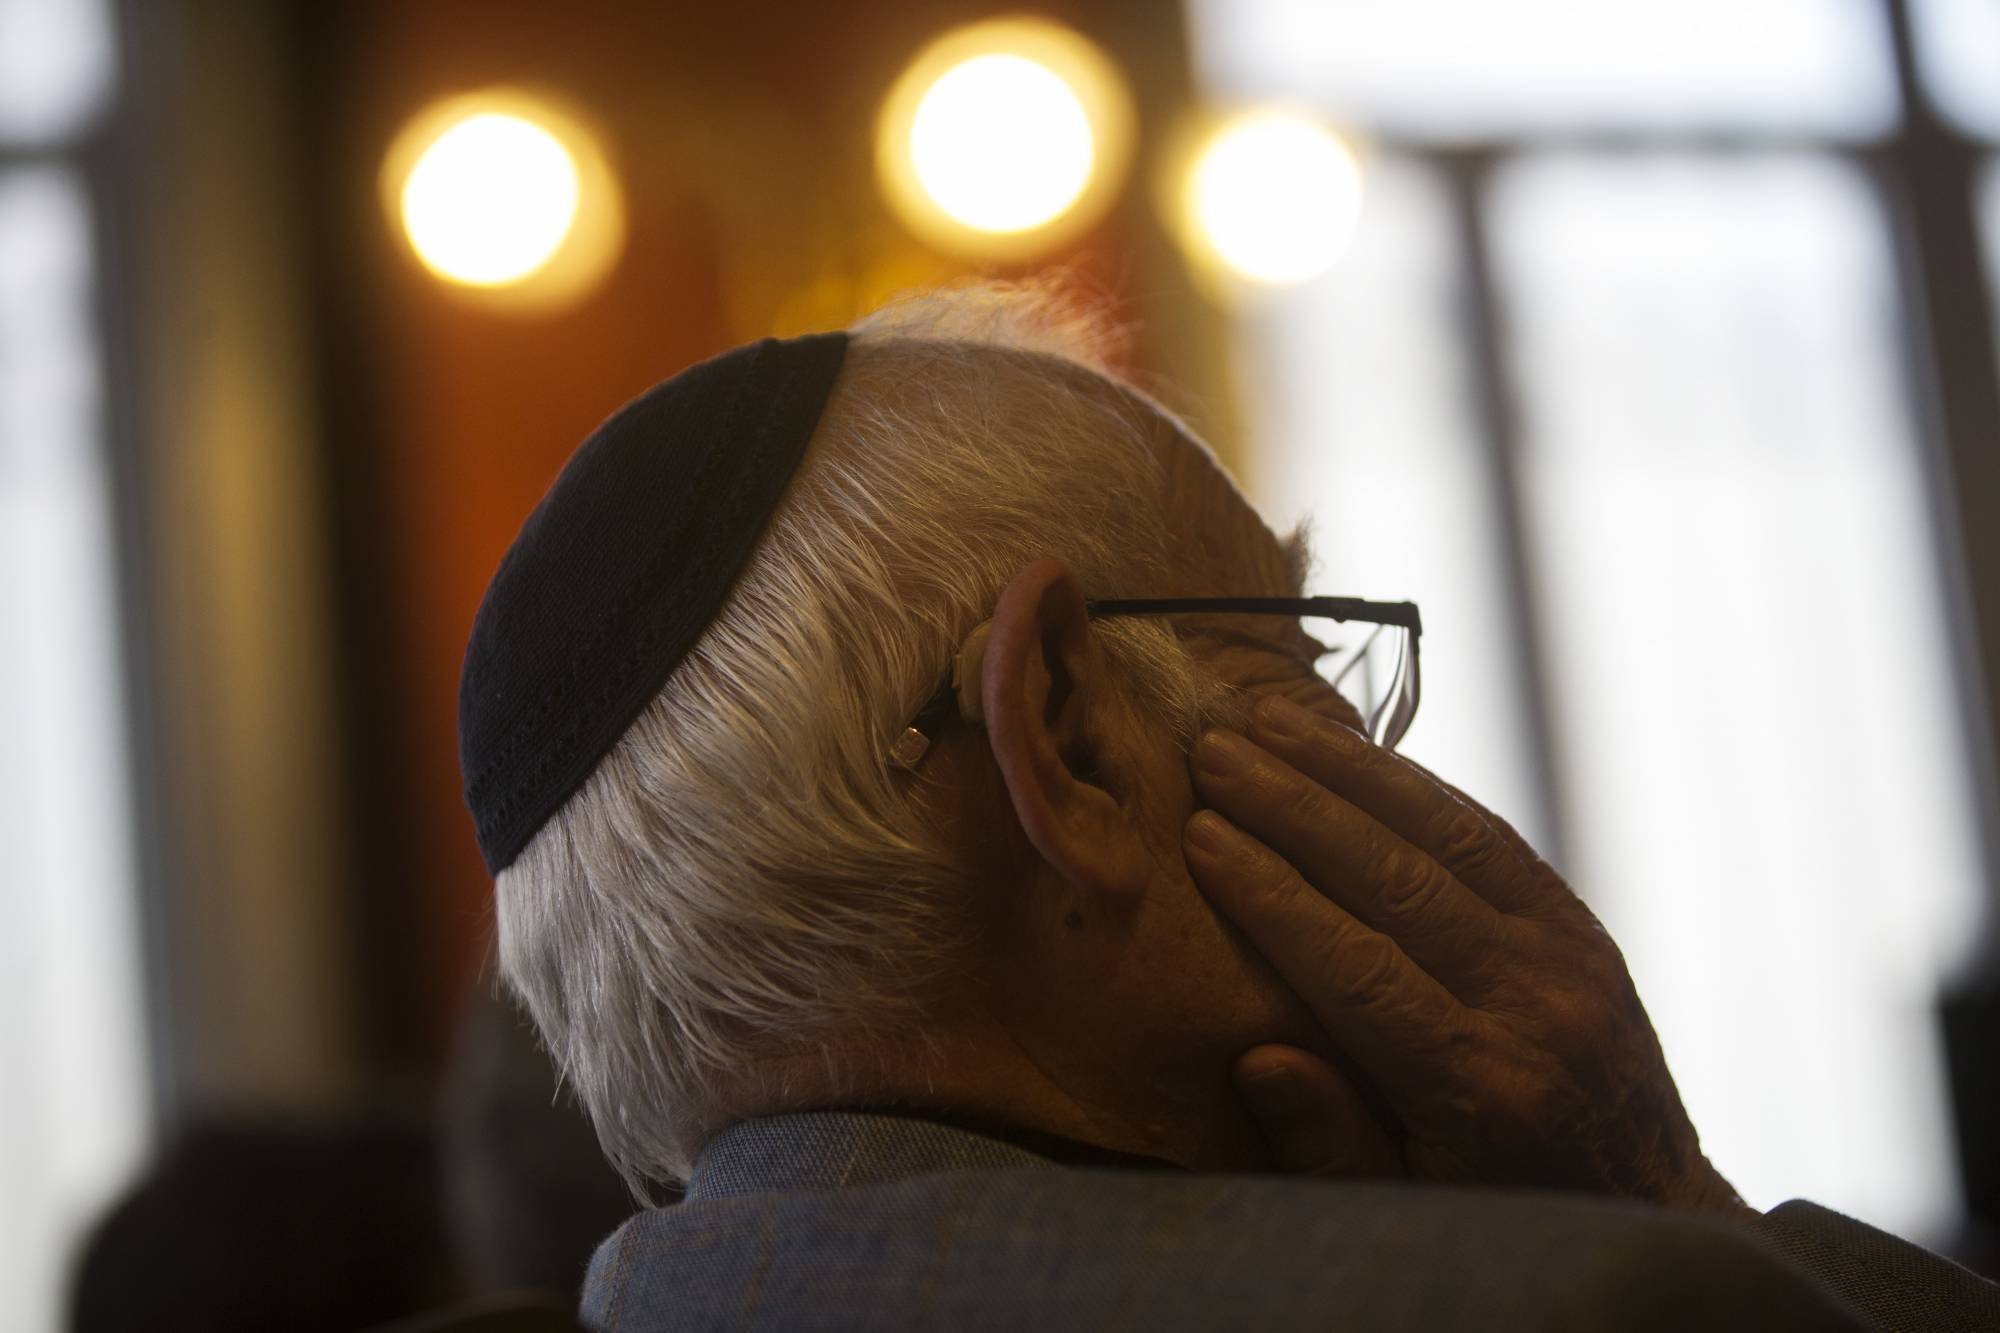 A man wearing a Jewish yarmulke listens during a news conference at the Royal Spanish Academy in Madrid, Tuesday, Feb. 20, 2018. More than five centuries after their ancestors were kicked out of Spain, Sephardic Jews are closer to being granted an academic body to oversee and protect the Ladino or Judeo-Spanish, a language with the sounds of a medieval Spanish that has been passed on almost intact for generations. (AP Photo/Francisco Seco)